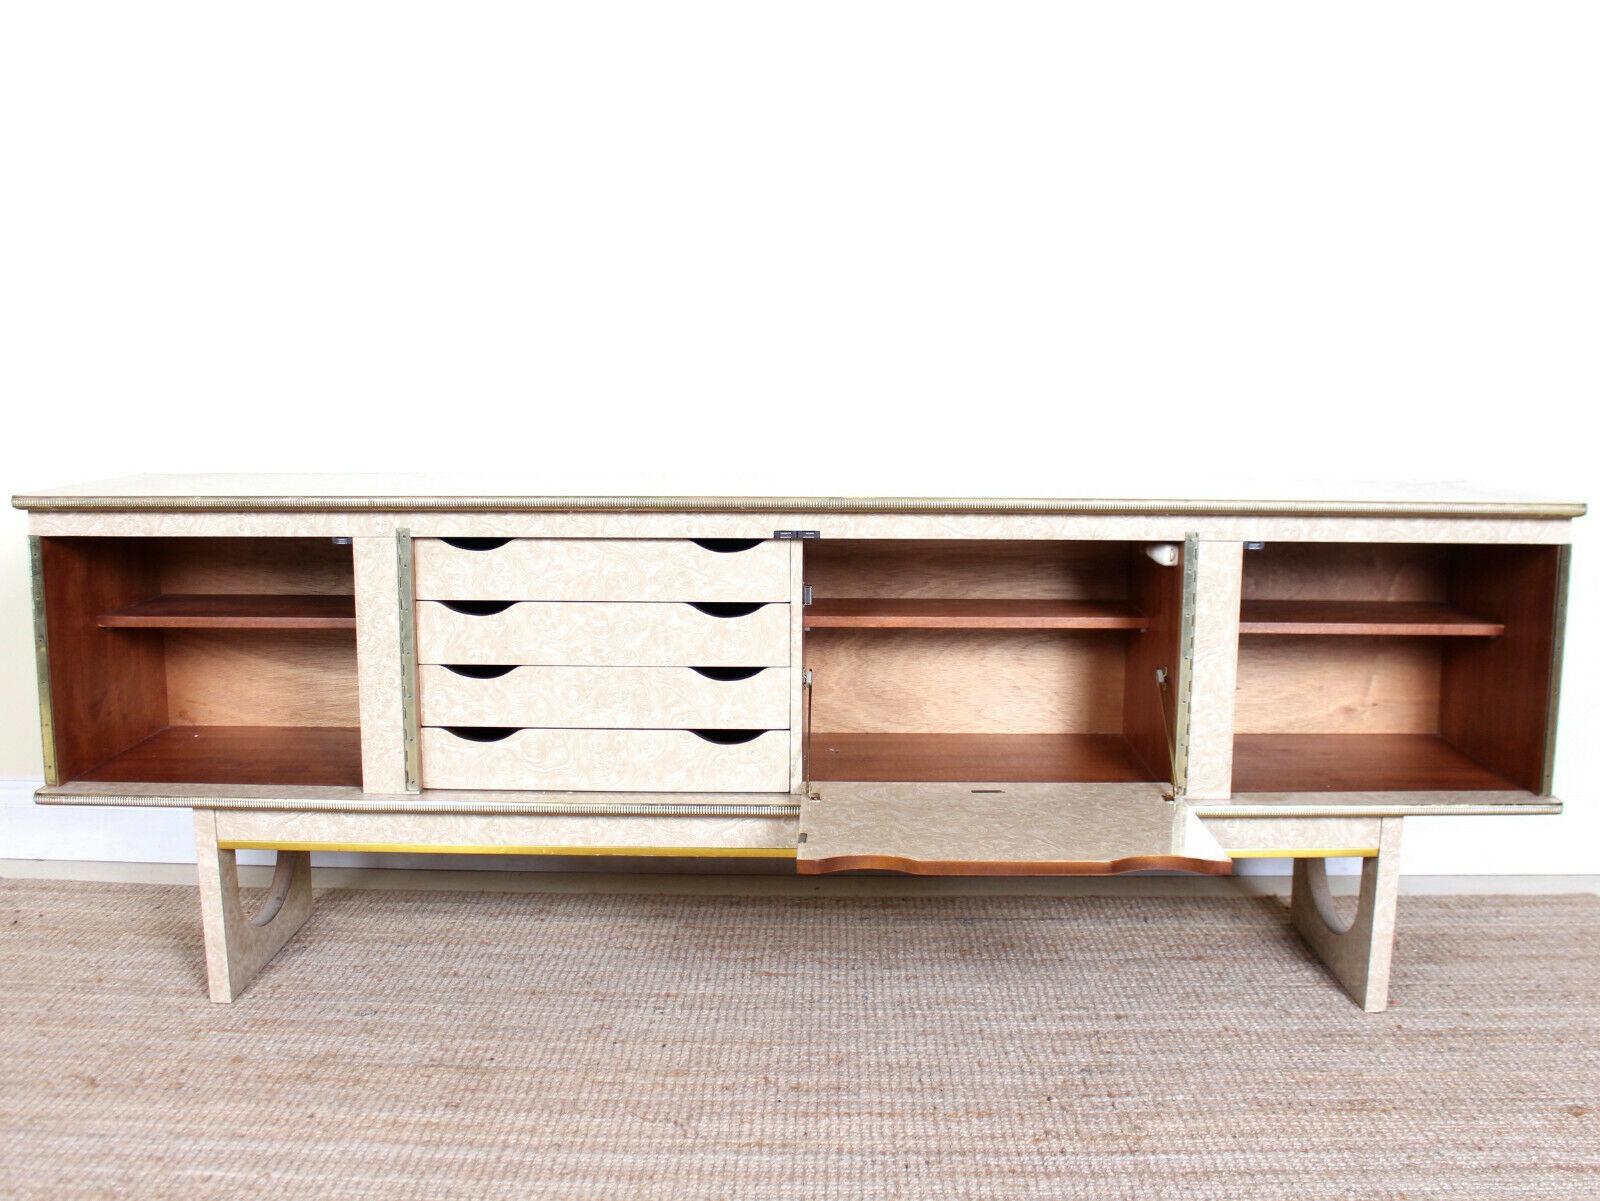 An impressive mid-20th century cocktail sideboard.
Brass trimmed bleached walnut print panels with a column of graduated trays flanked by a fall flap doors and cupboards enclosed shelving.